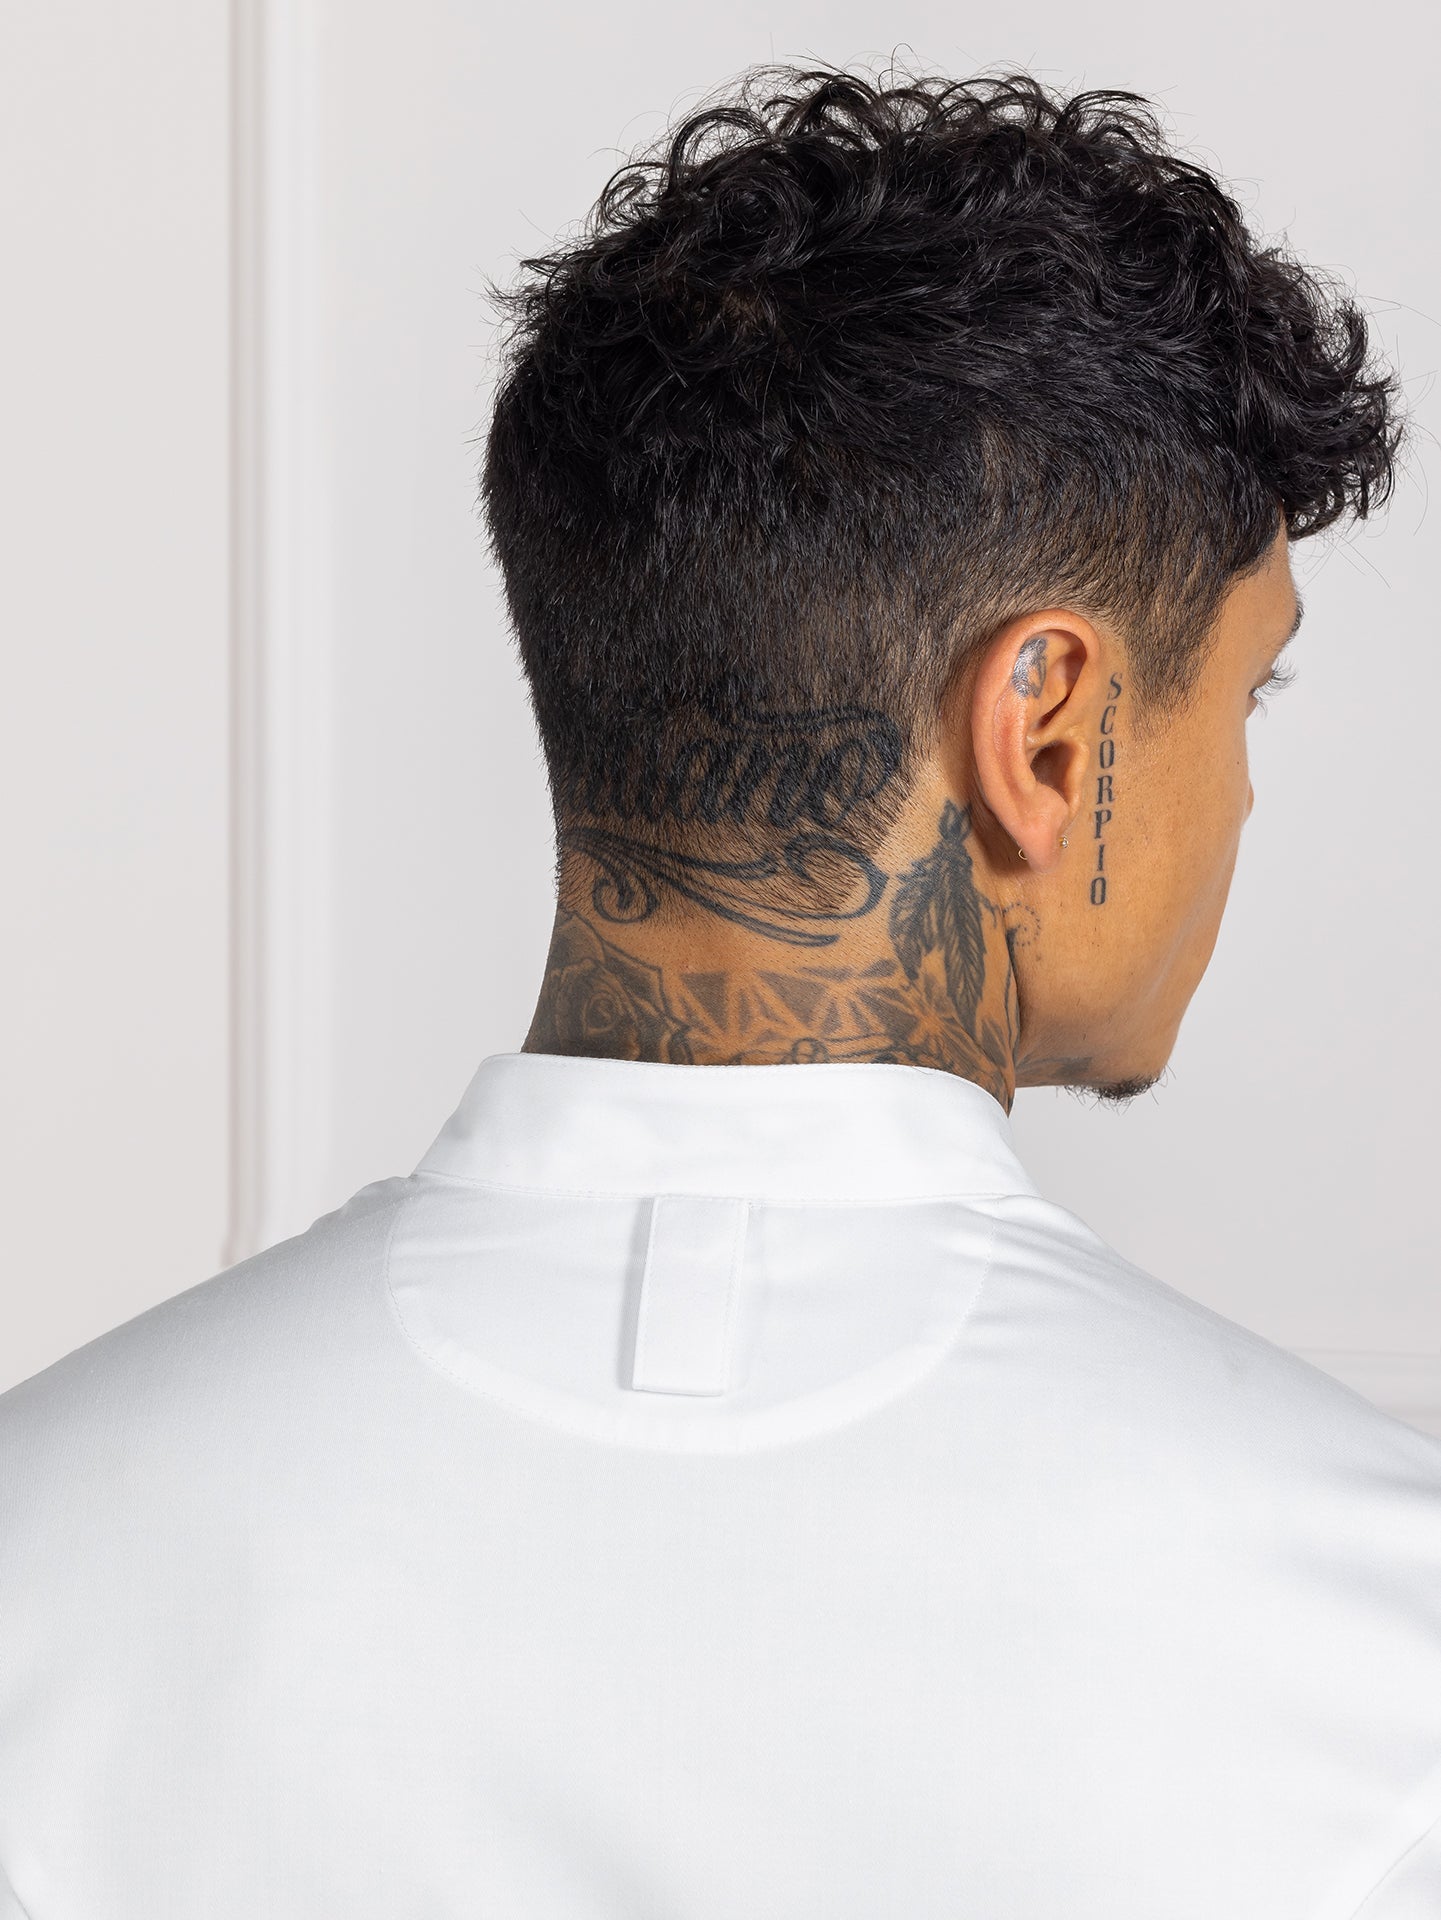 Chef Jacket Gusto White by Le Nouveau Chef -  ChefsCotton